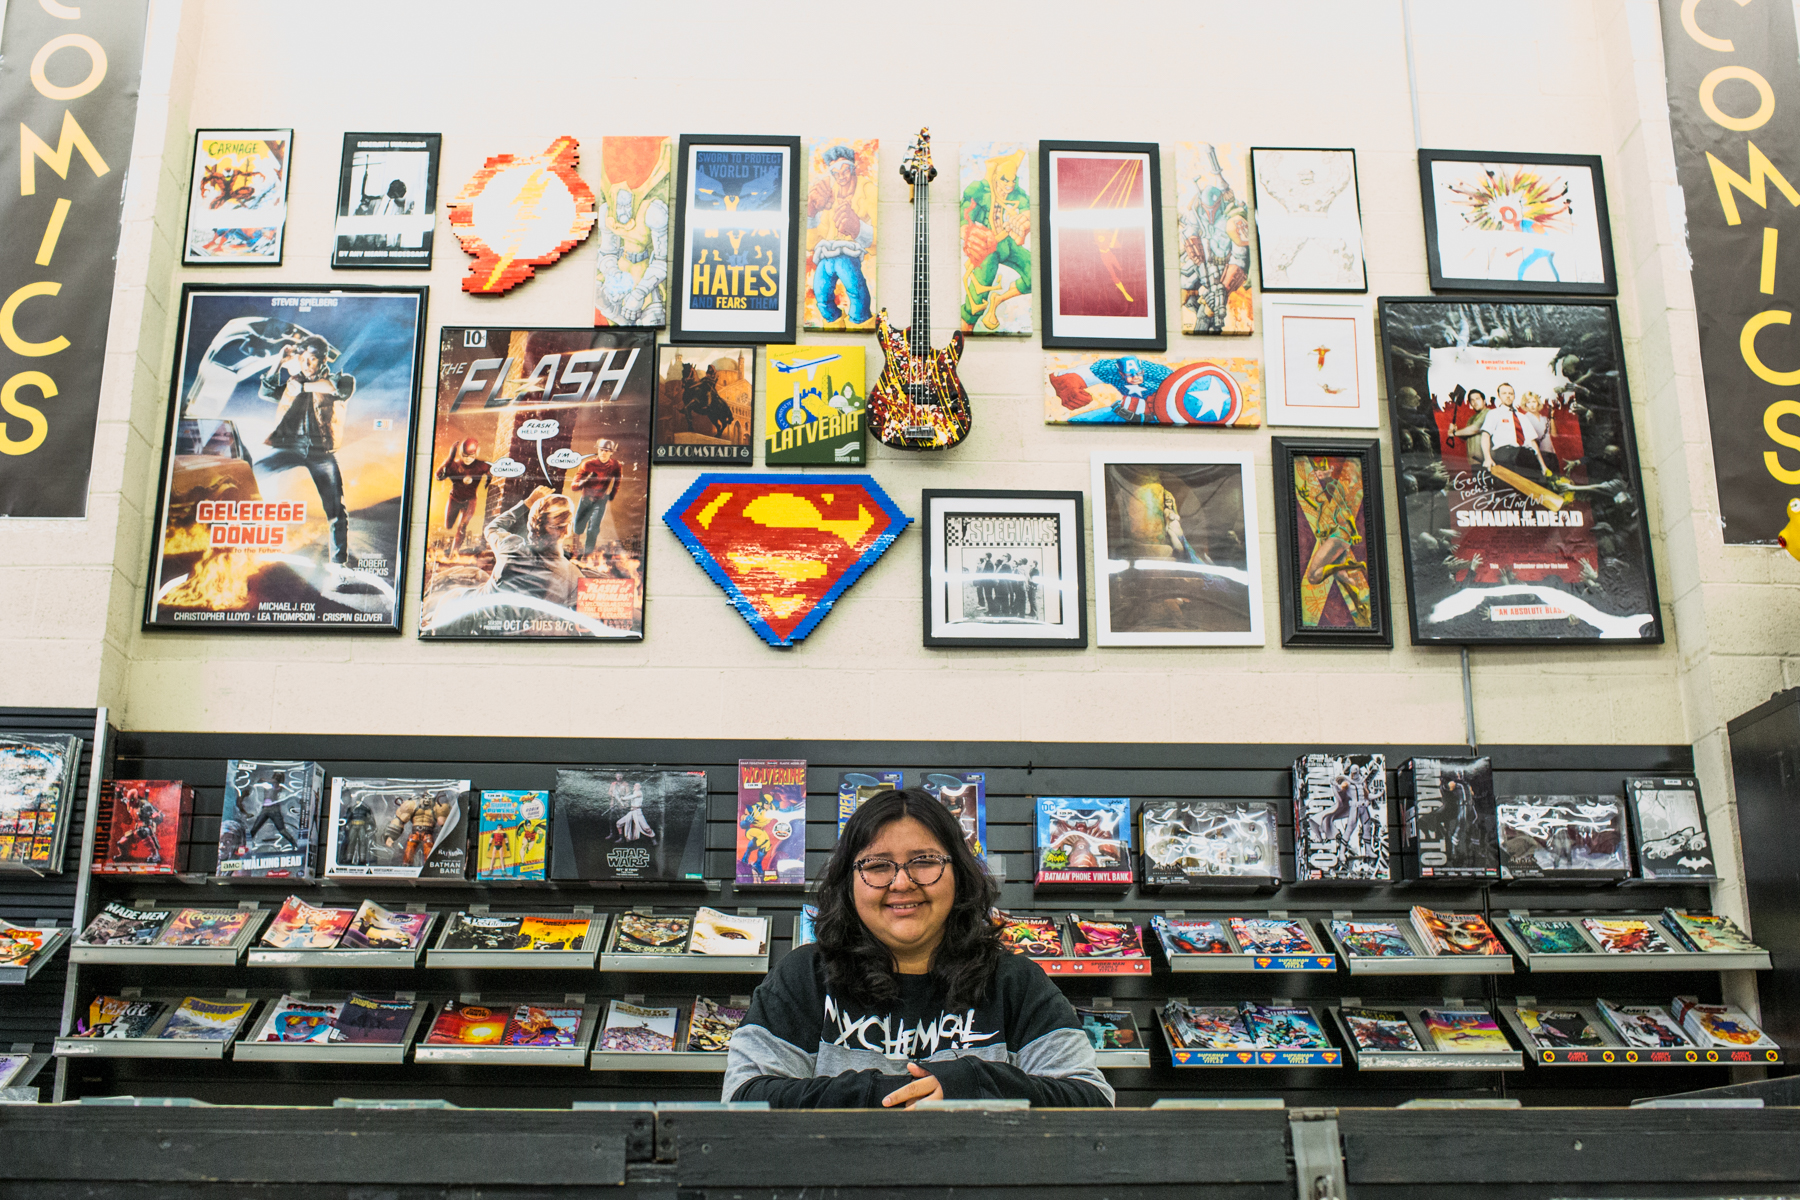  Jennifer Lopez, an employee of Southern California's oldest running comic book store 'HI DE HO COMICS', poses in front of their merchandise at their Santa Monice store in Santa Monica, CA on Thursday March 1 2018. (Photo by Ruth Iorio) 